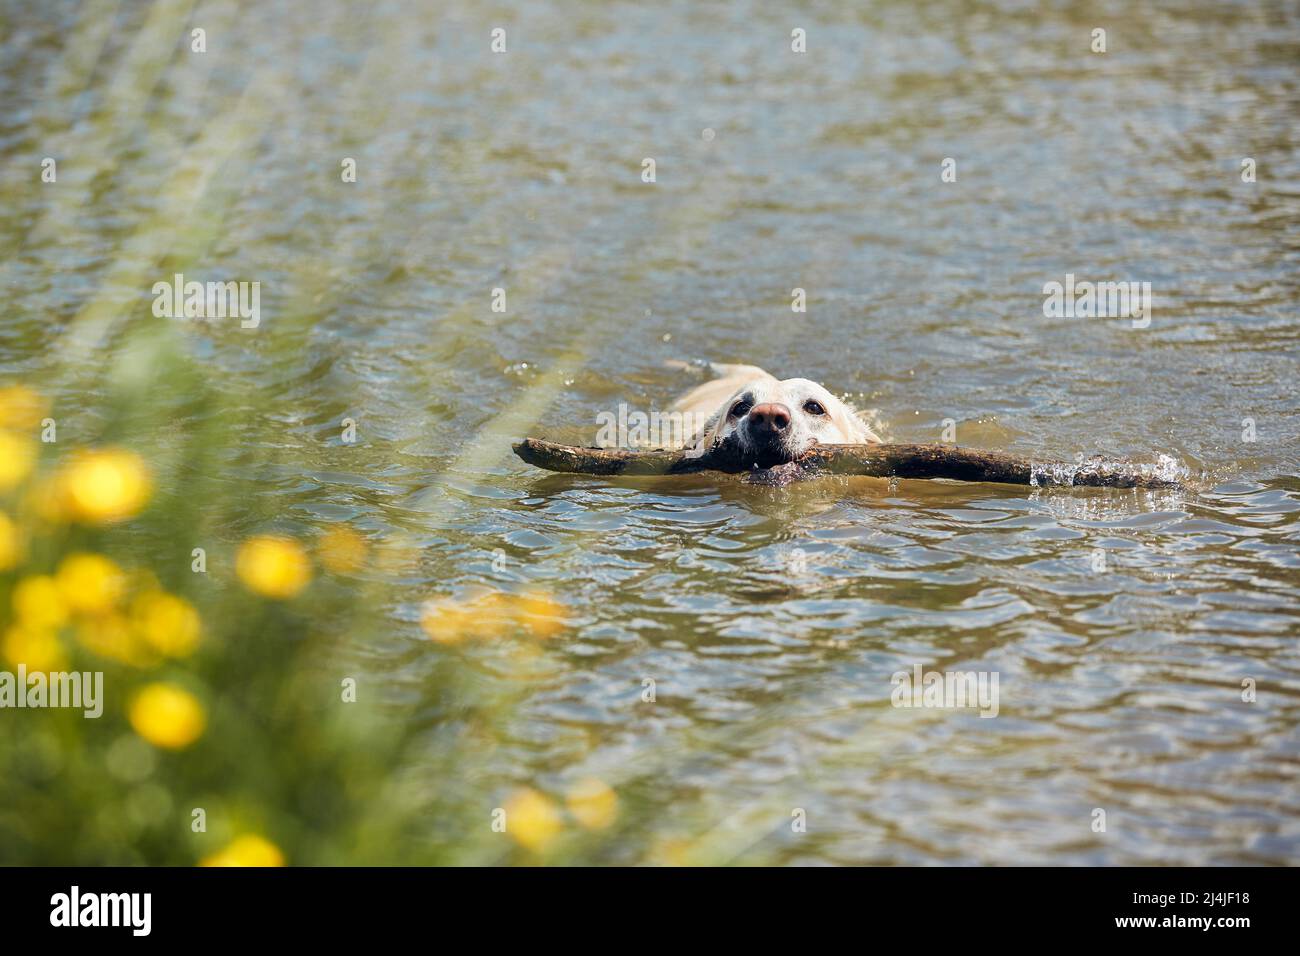 Playful dog swimming in river. Happy labrador retriever carrying stick from water in sunny spring day. Stock Photo